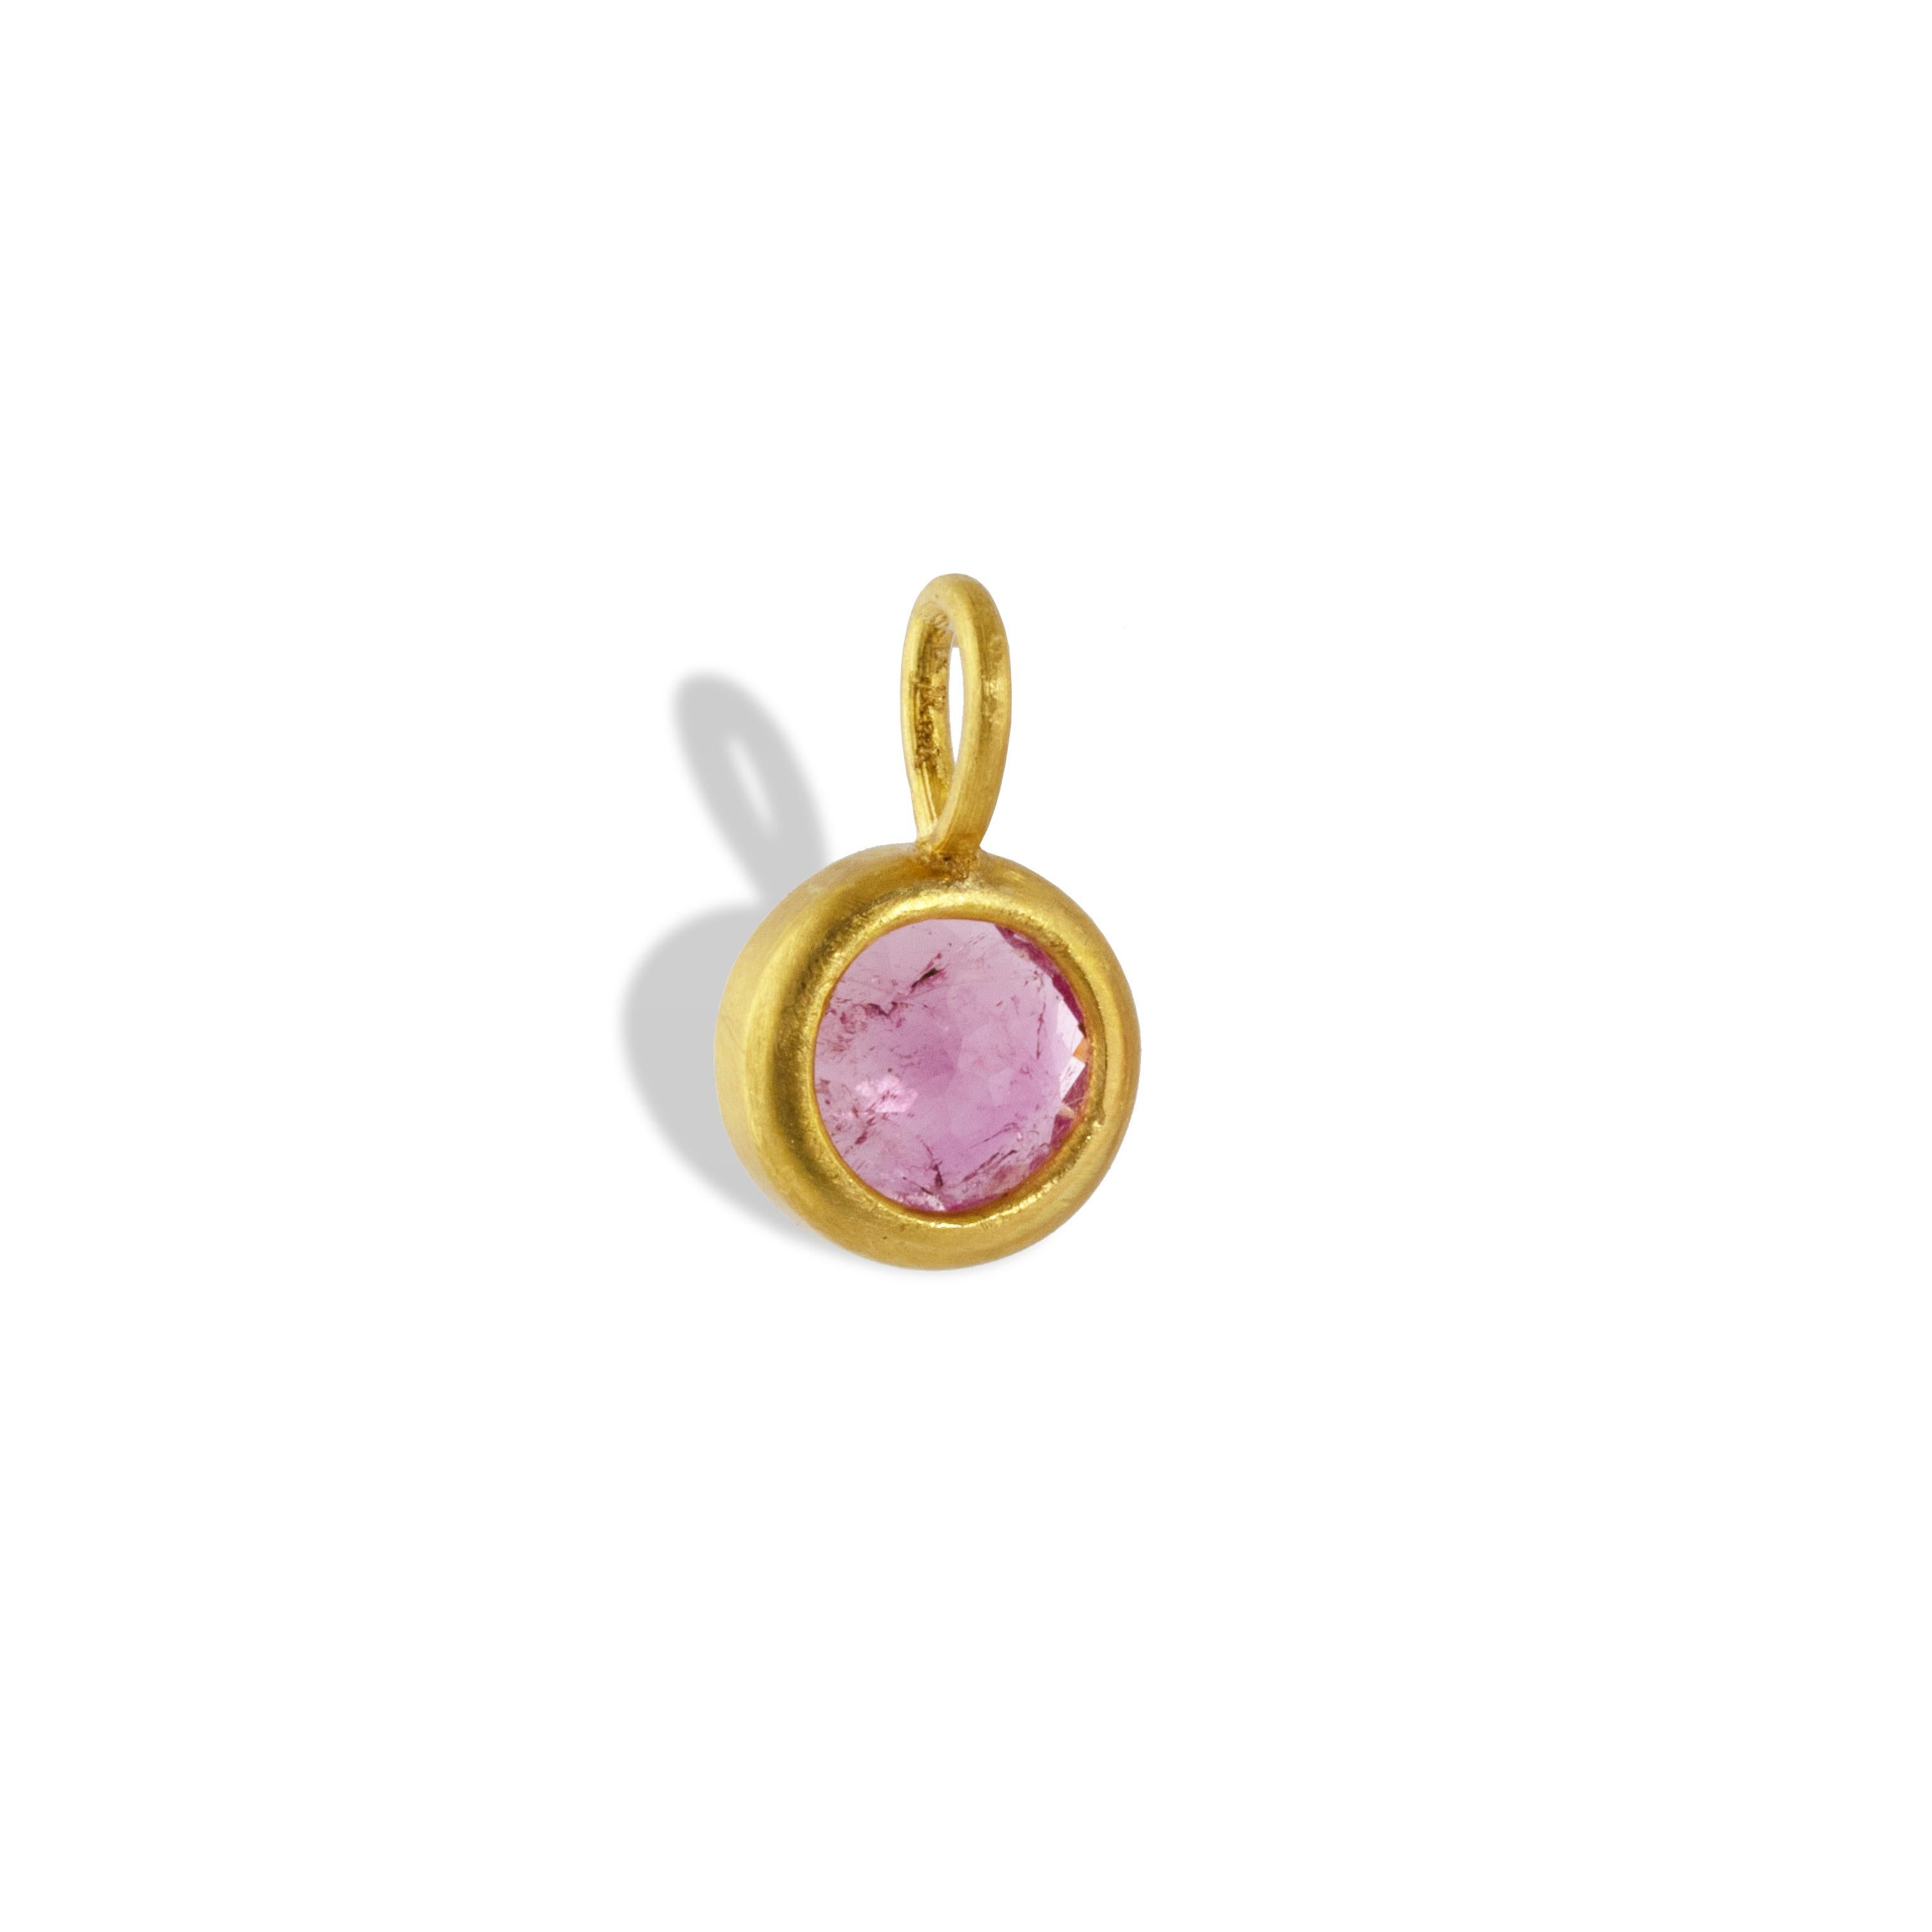 A delicate pink tourmaline is set in 22k yellow gold.  This delicate pendant is 12.44mm long x 7mm wide and 5mm deep. 

Pink tourmaline represents a love of humanity and humanitarianism. It is worn to promote sympathy towards others.  It is one of